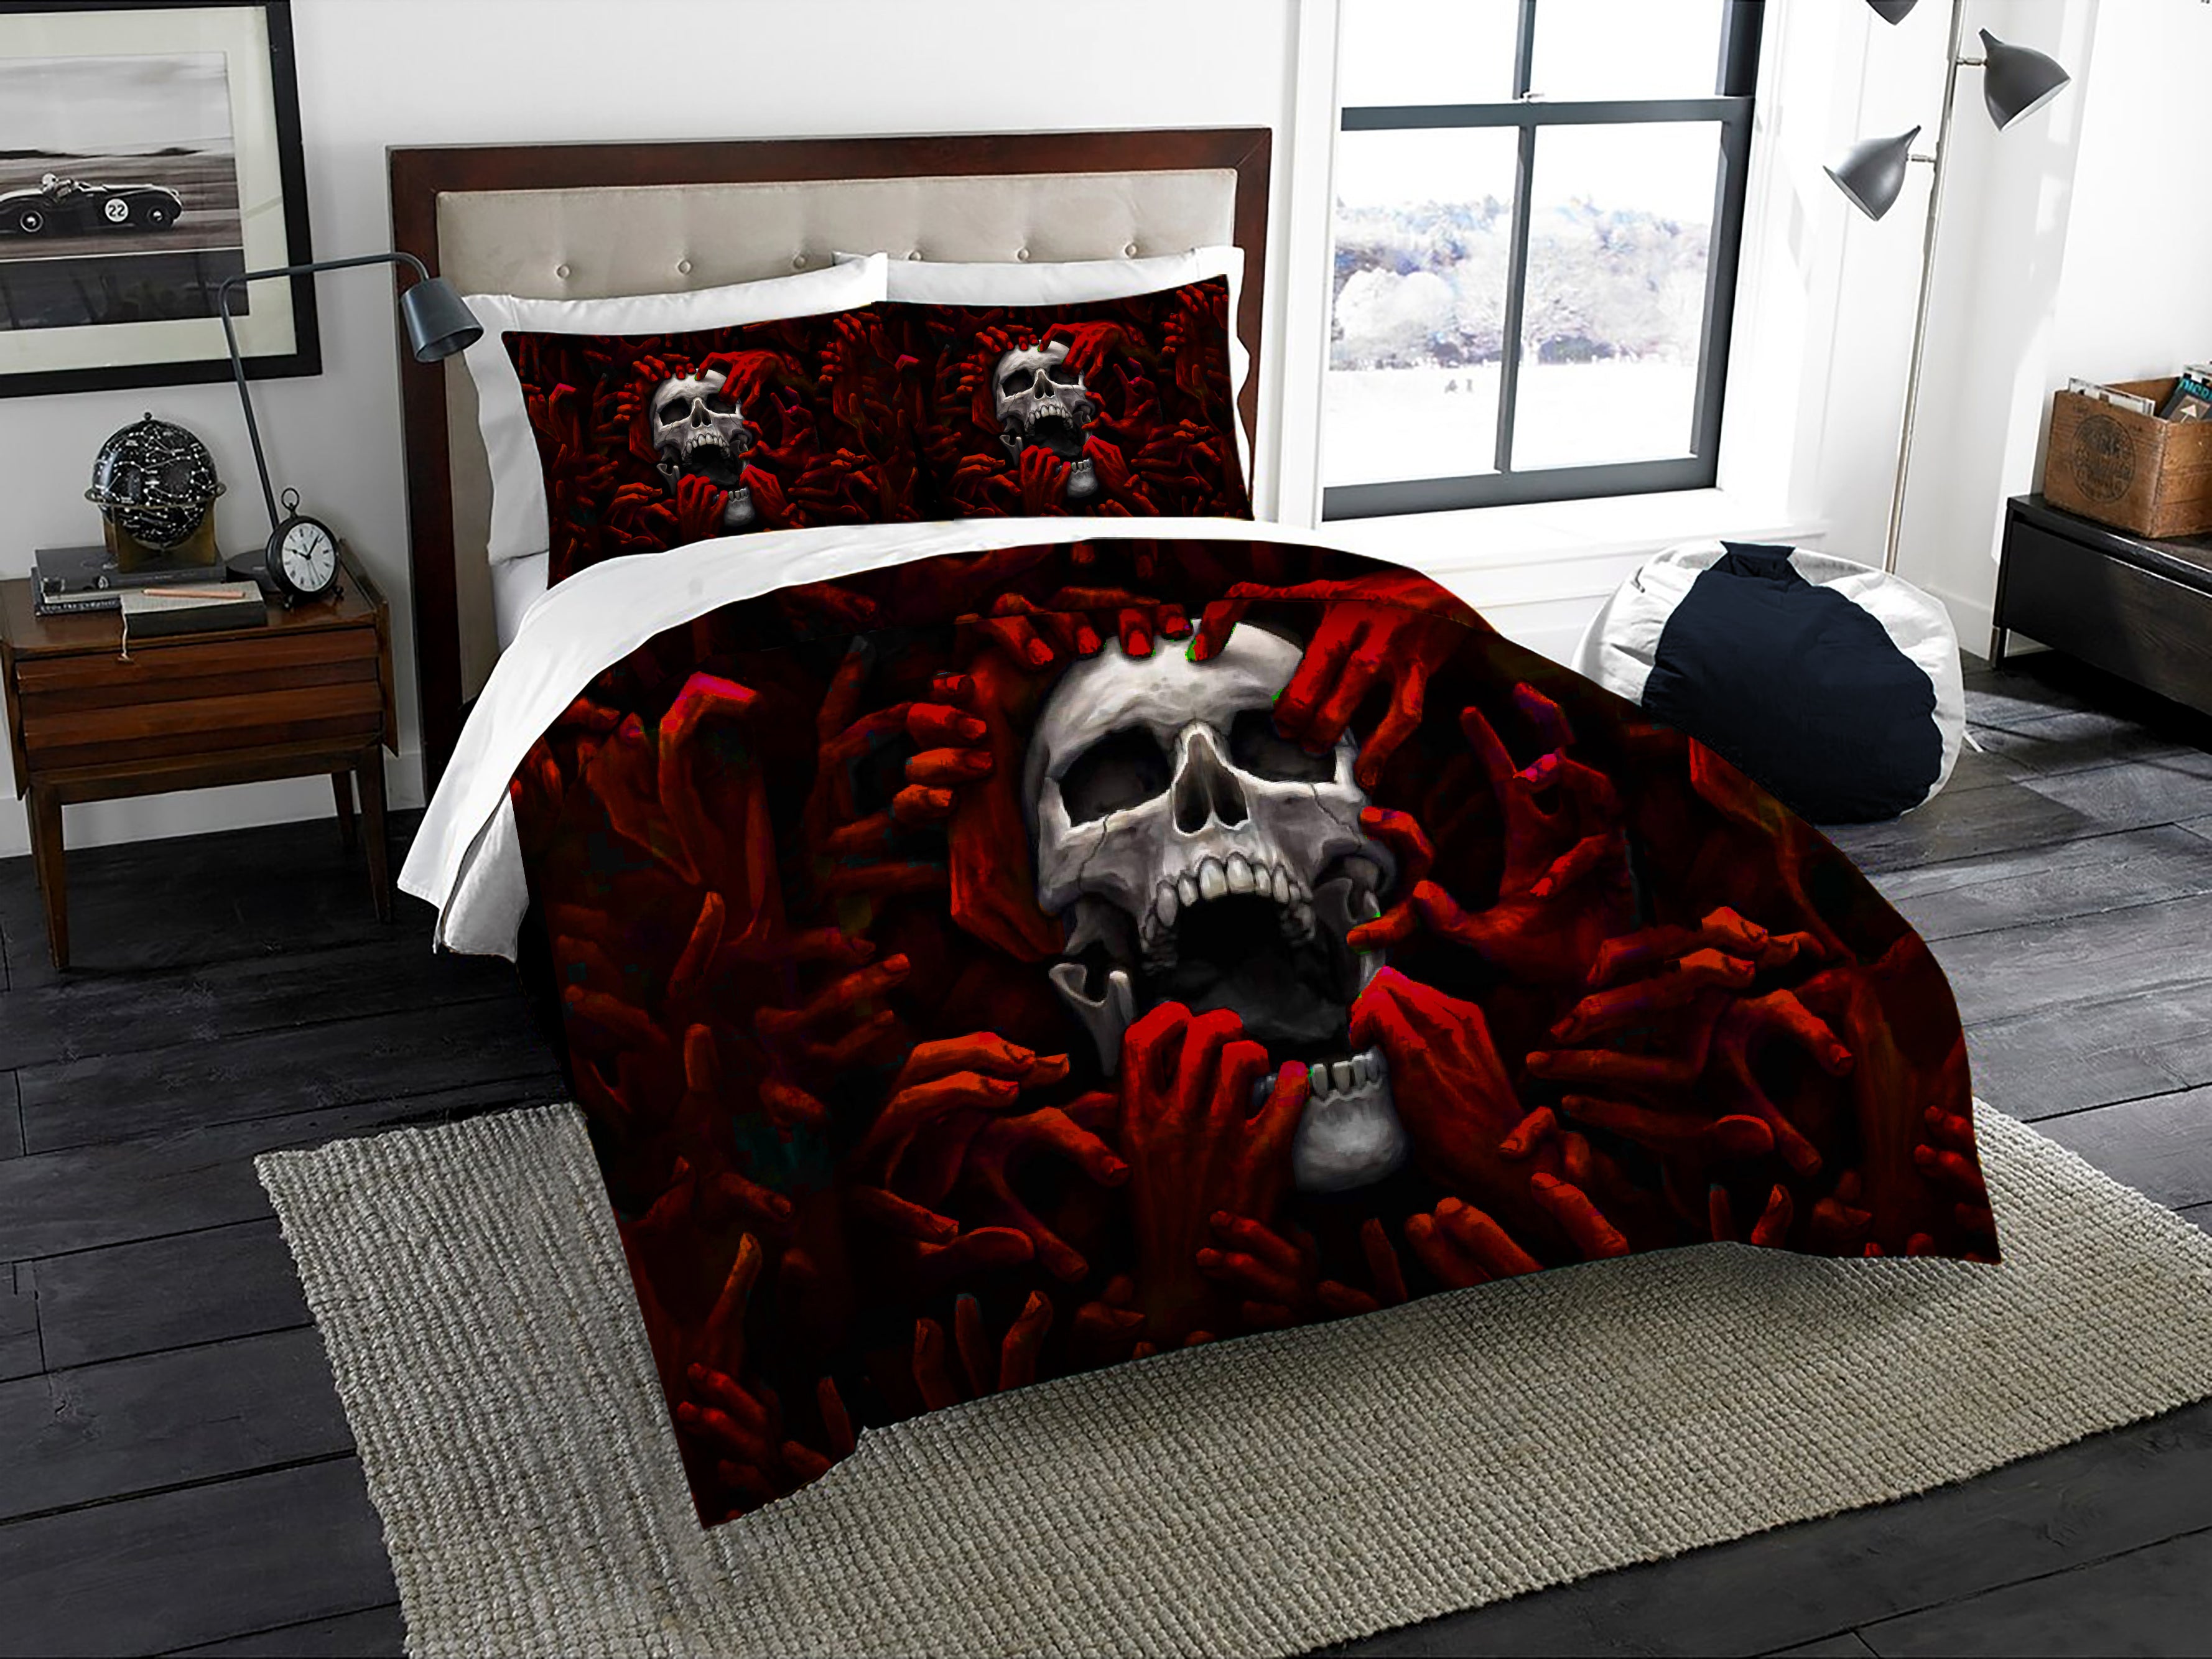 Skull Red Hands From Hell Bedding Set 08632